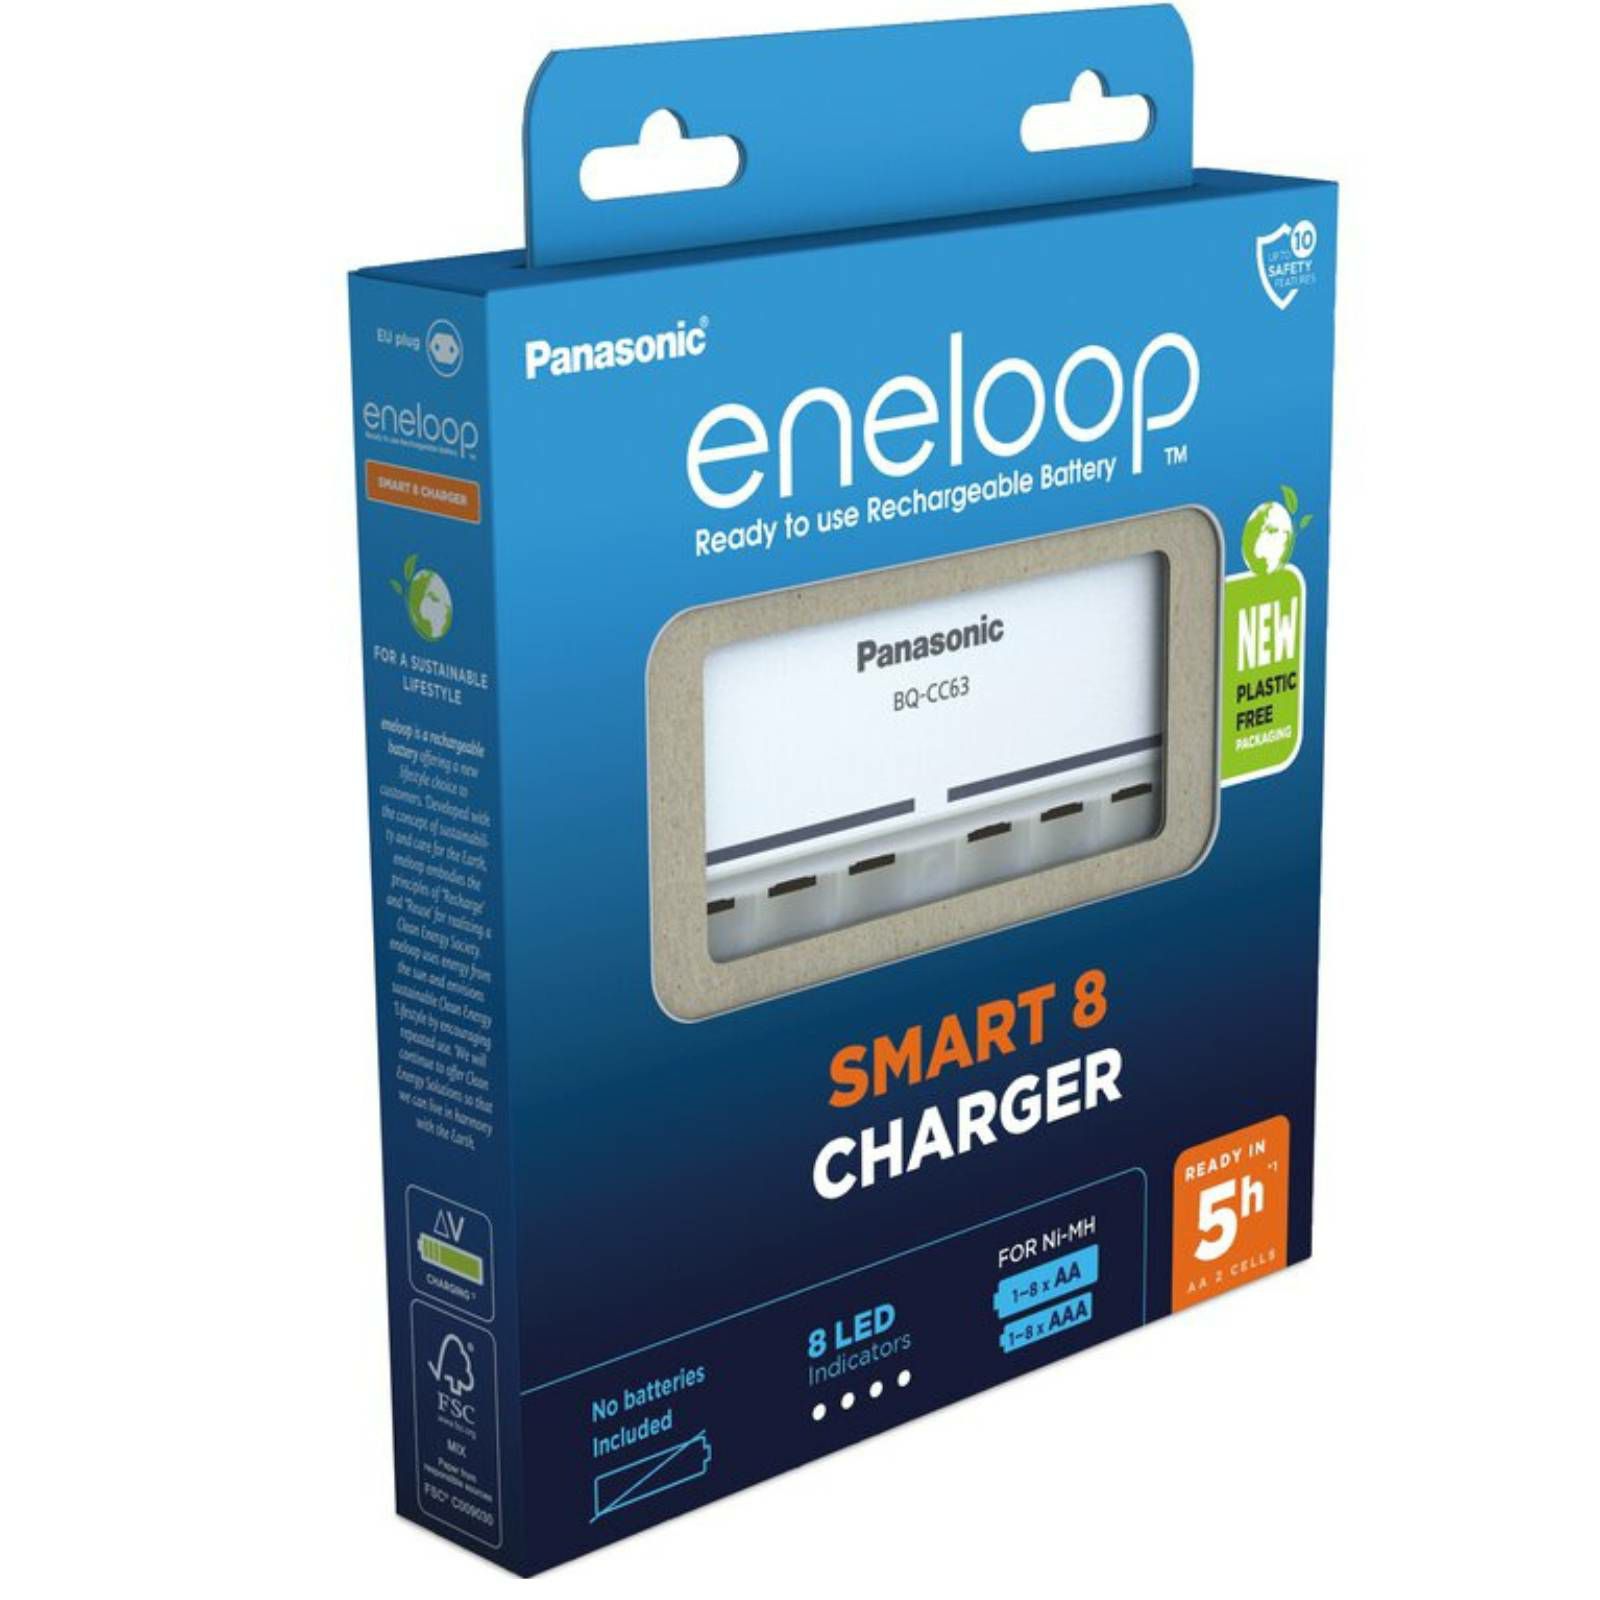 Panasonic Eneloop battery charger for R6/AA and R03/AAA (BQ-CC63) 